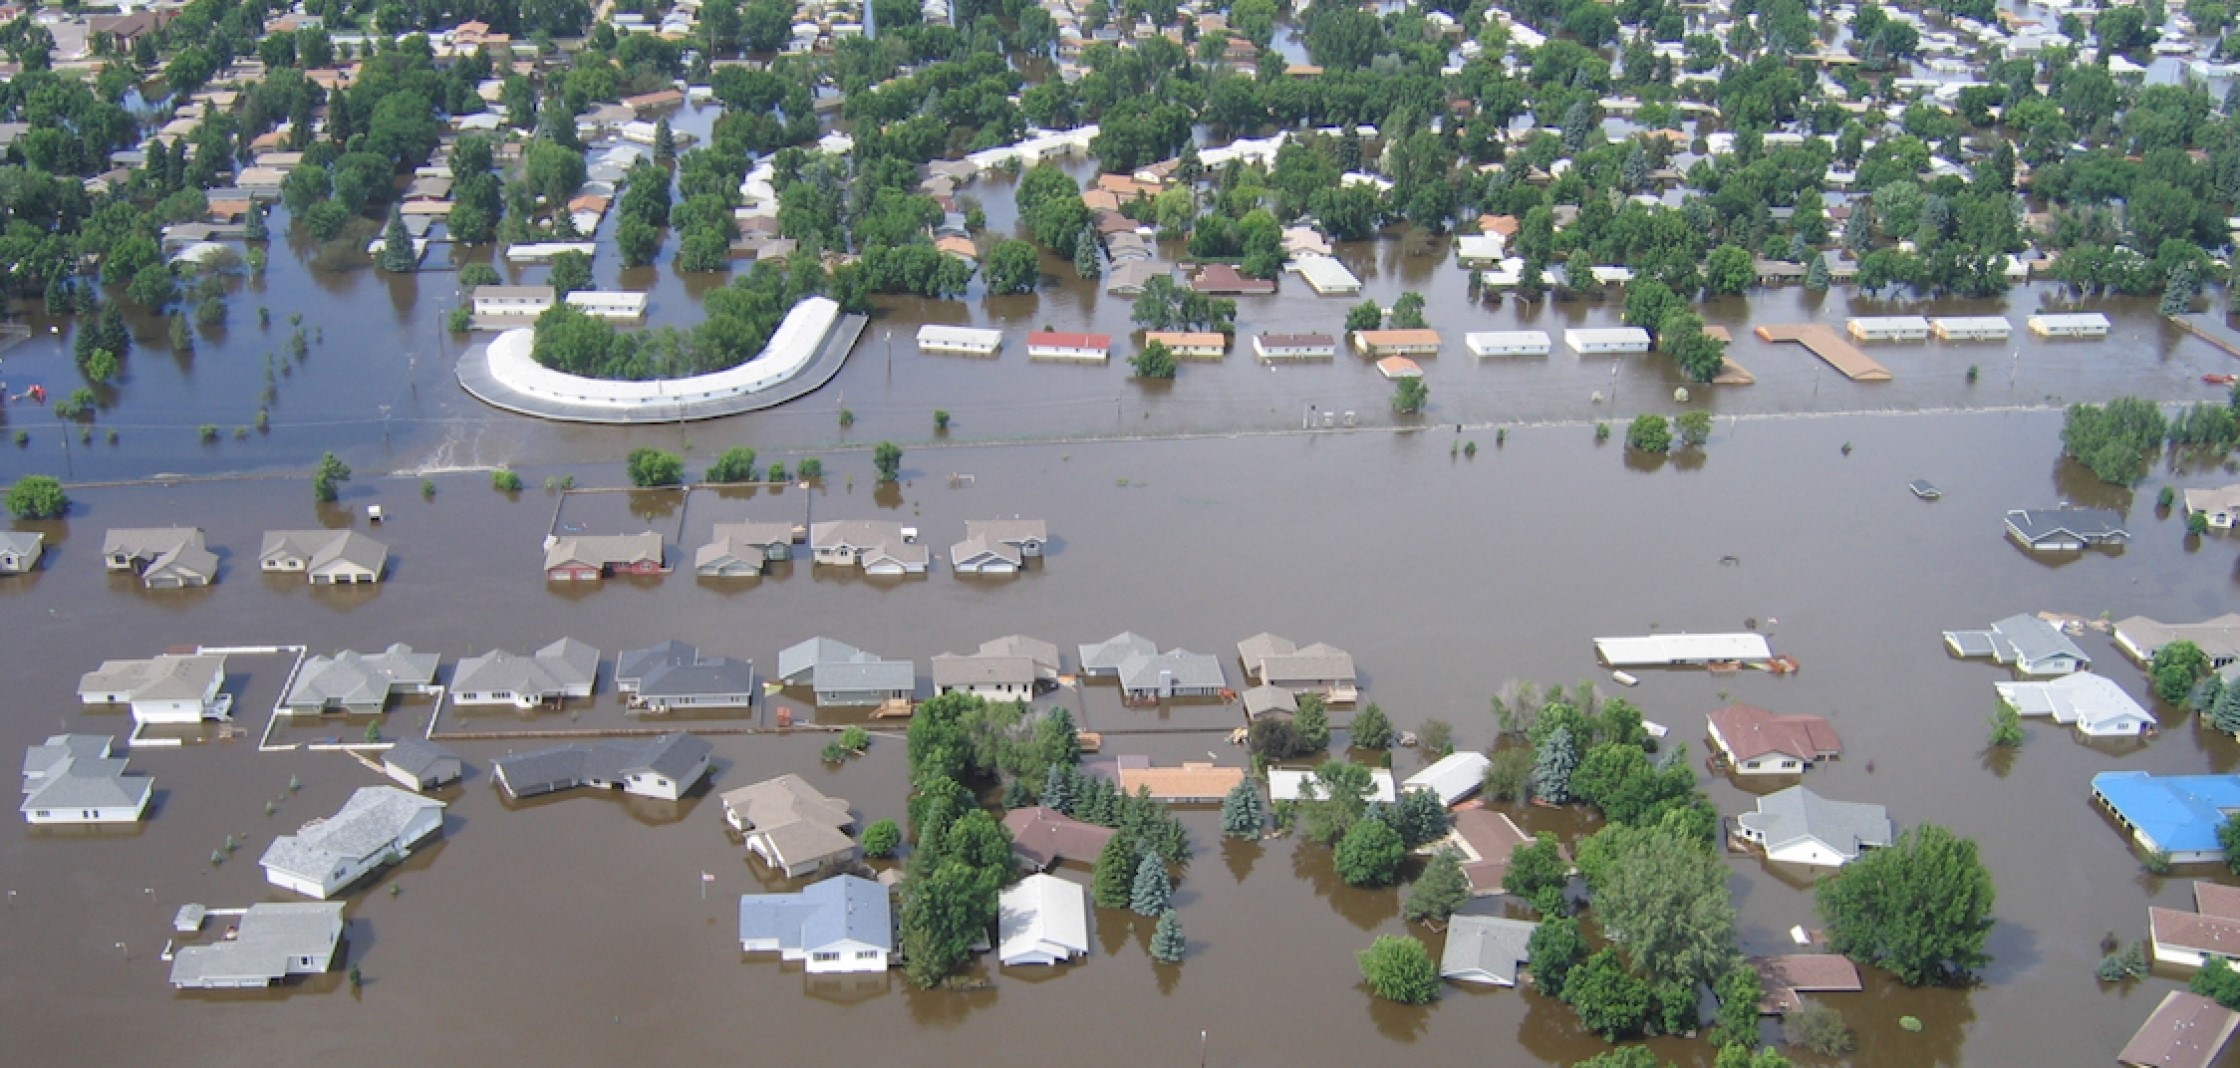 The US National Oceanic and Atmospheric Administration is urging communities in northern North Dakota to prepare for moderate-to-major flooding along the Souris River. The last flood, pictured here in Minot, took place in 2011. Credit: North Dakota State Water Commission